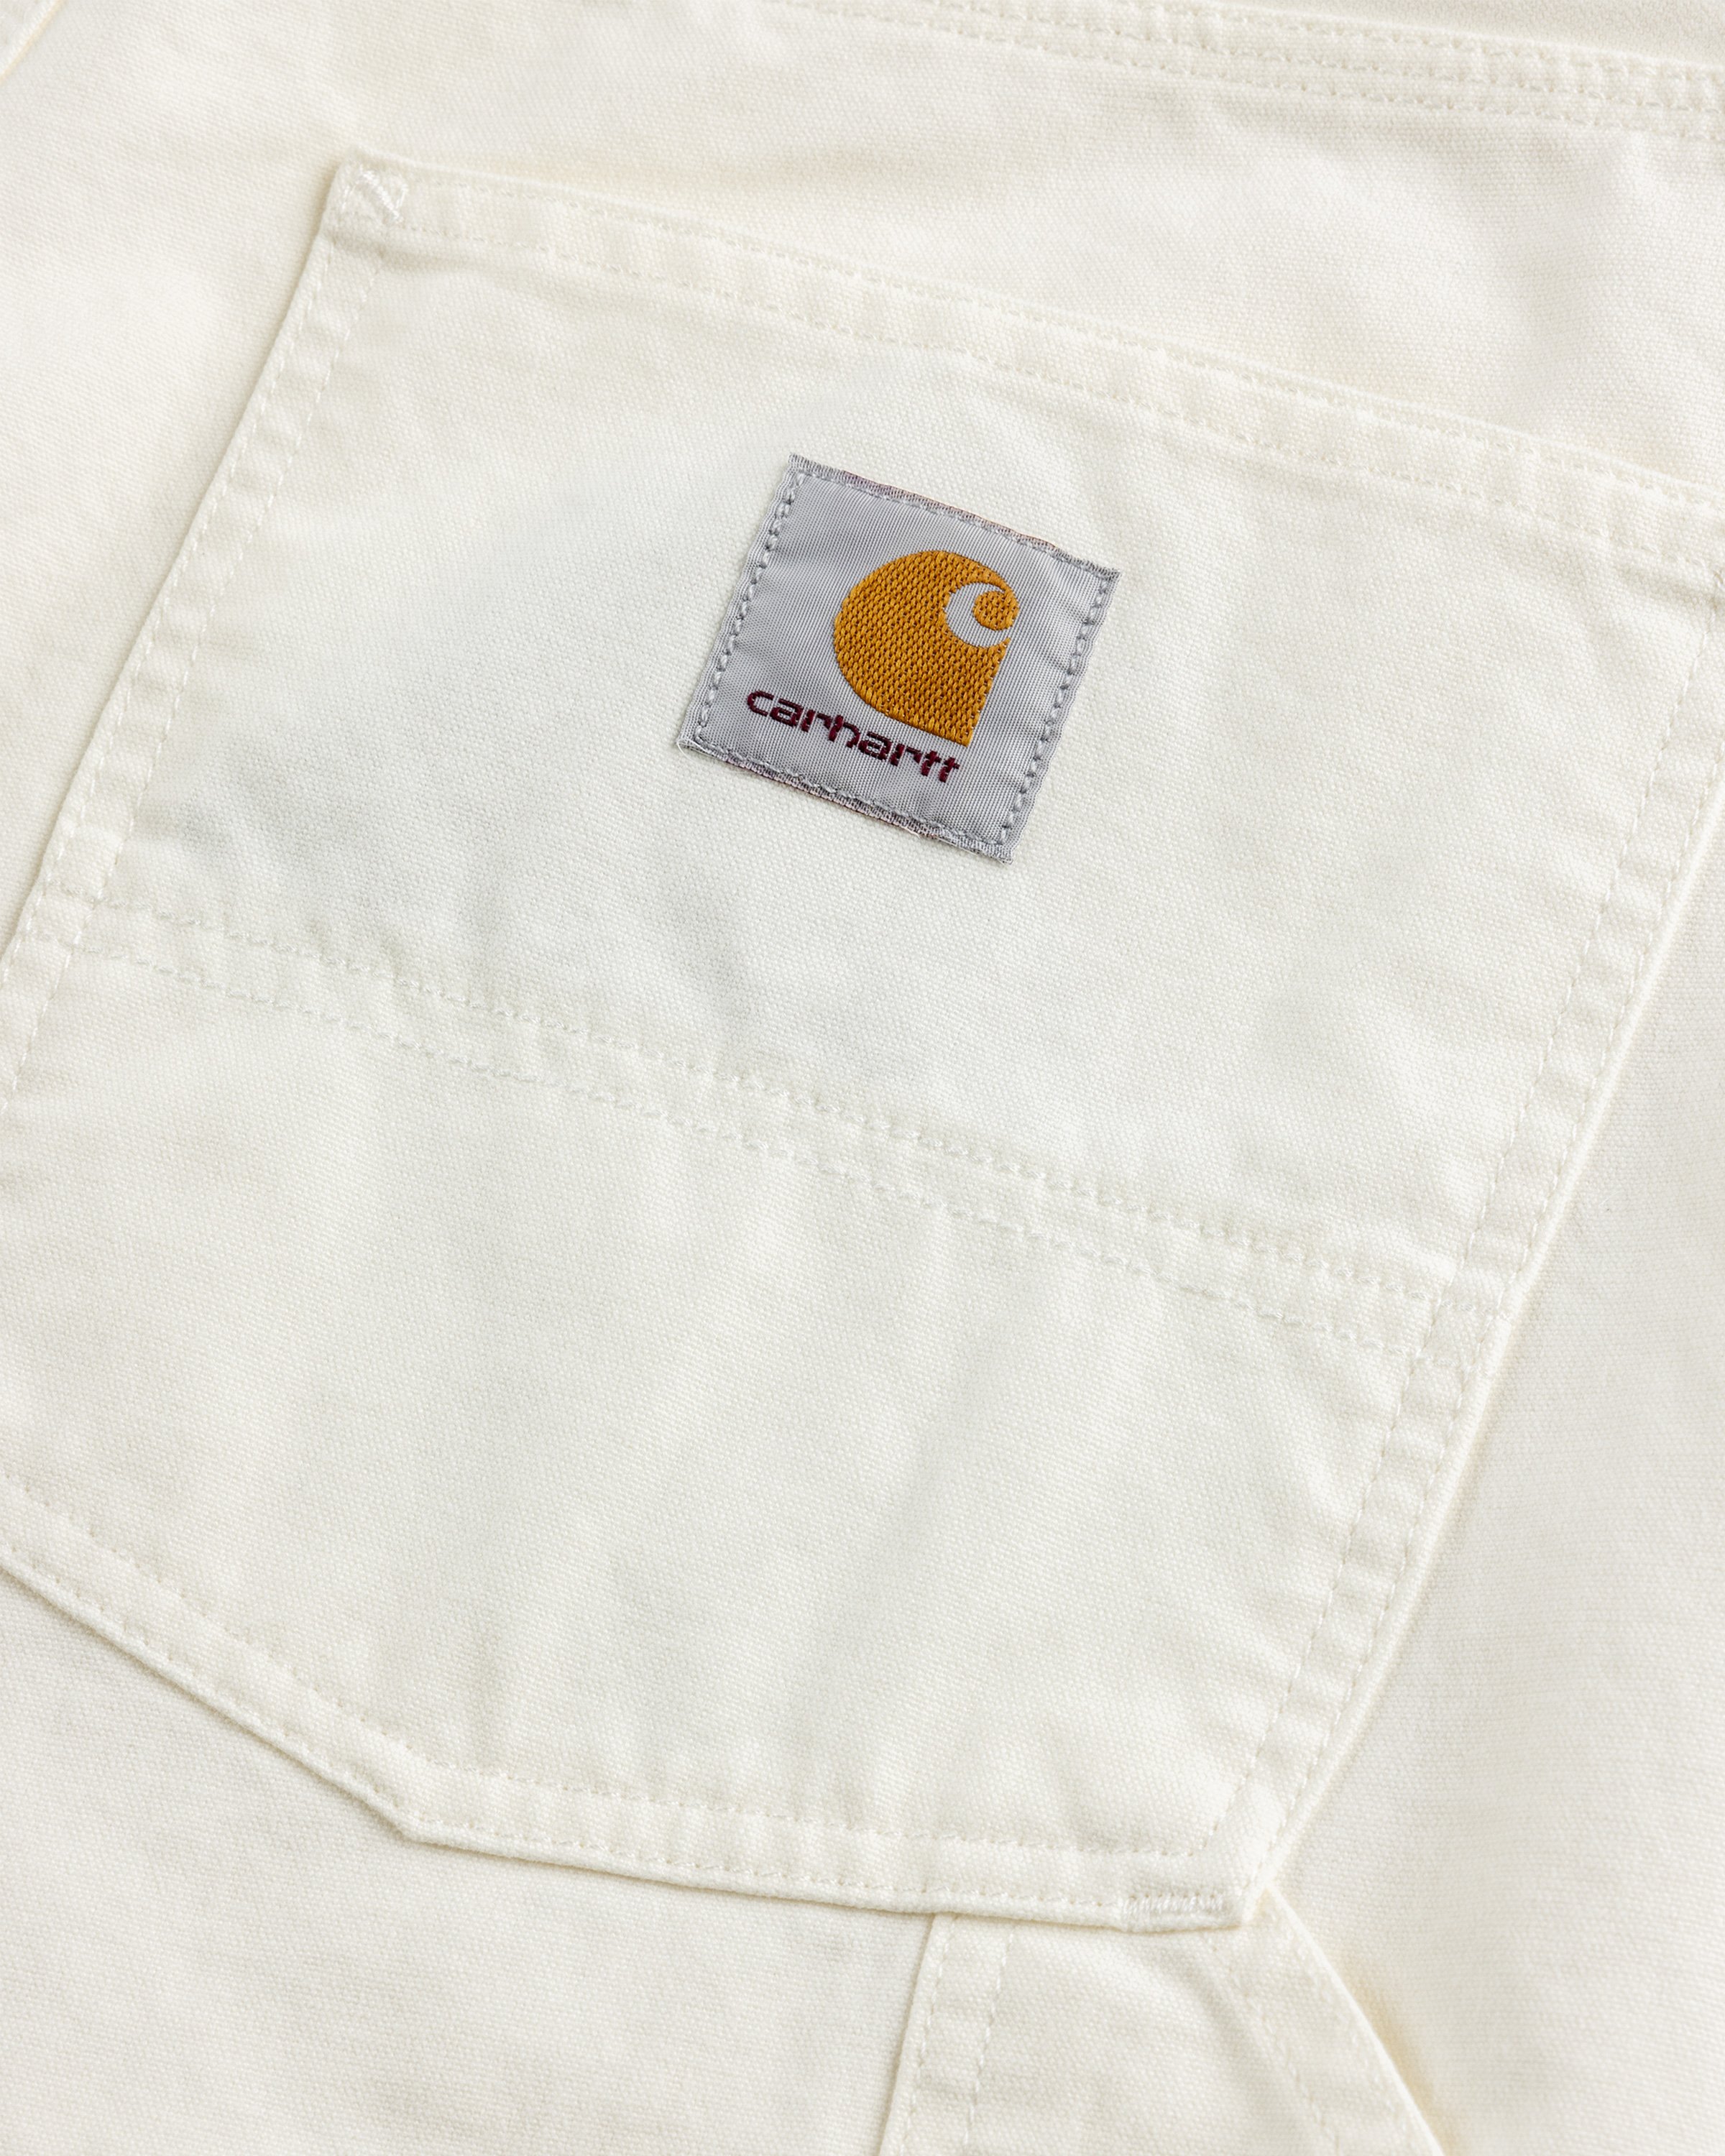 Carhartt WIP - Double Knee Short Wax /rinsed - Clothing - White - Image 6